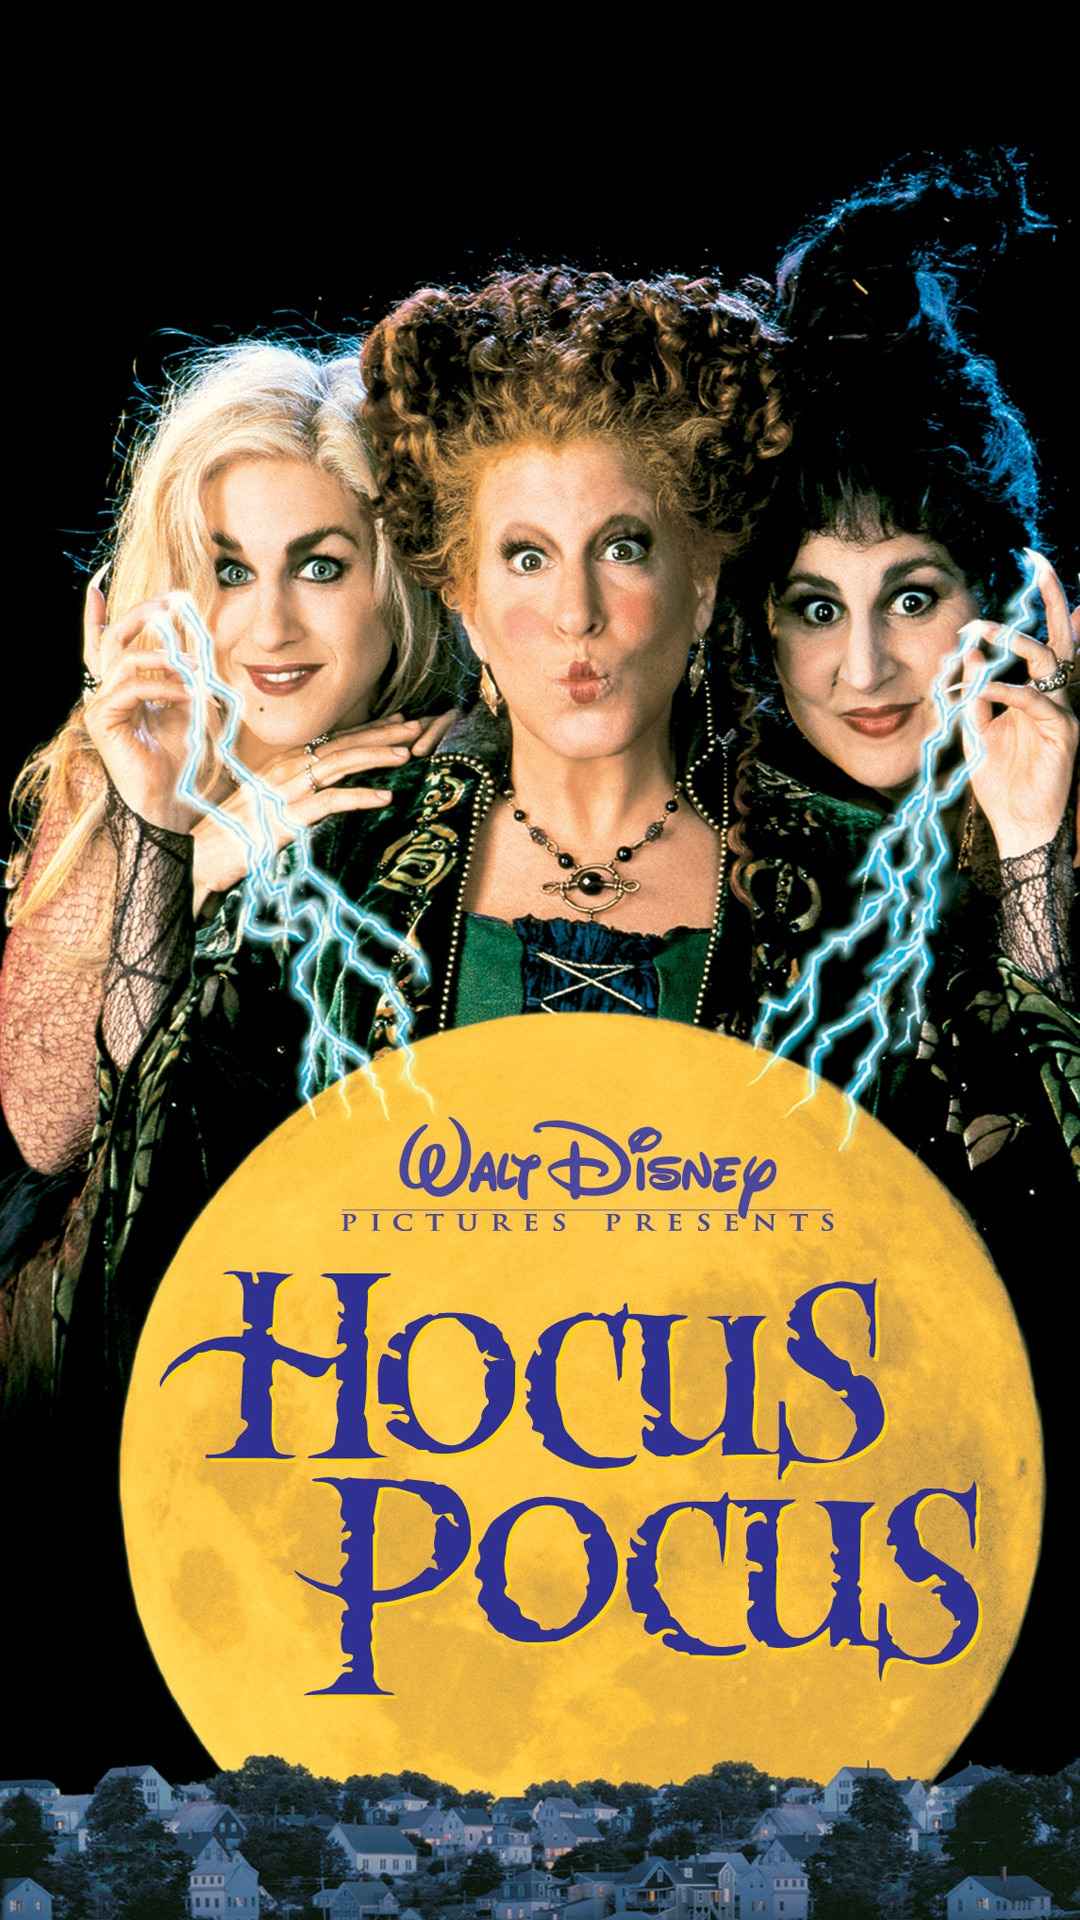 Bette Midler Slams Disney Channel's Hocus Pocus Remake: It's Going to Be Cheap! | E! News1080 x 1920